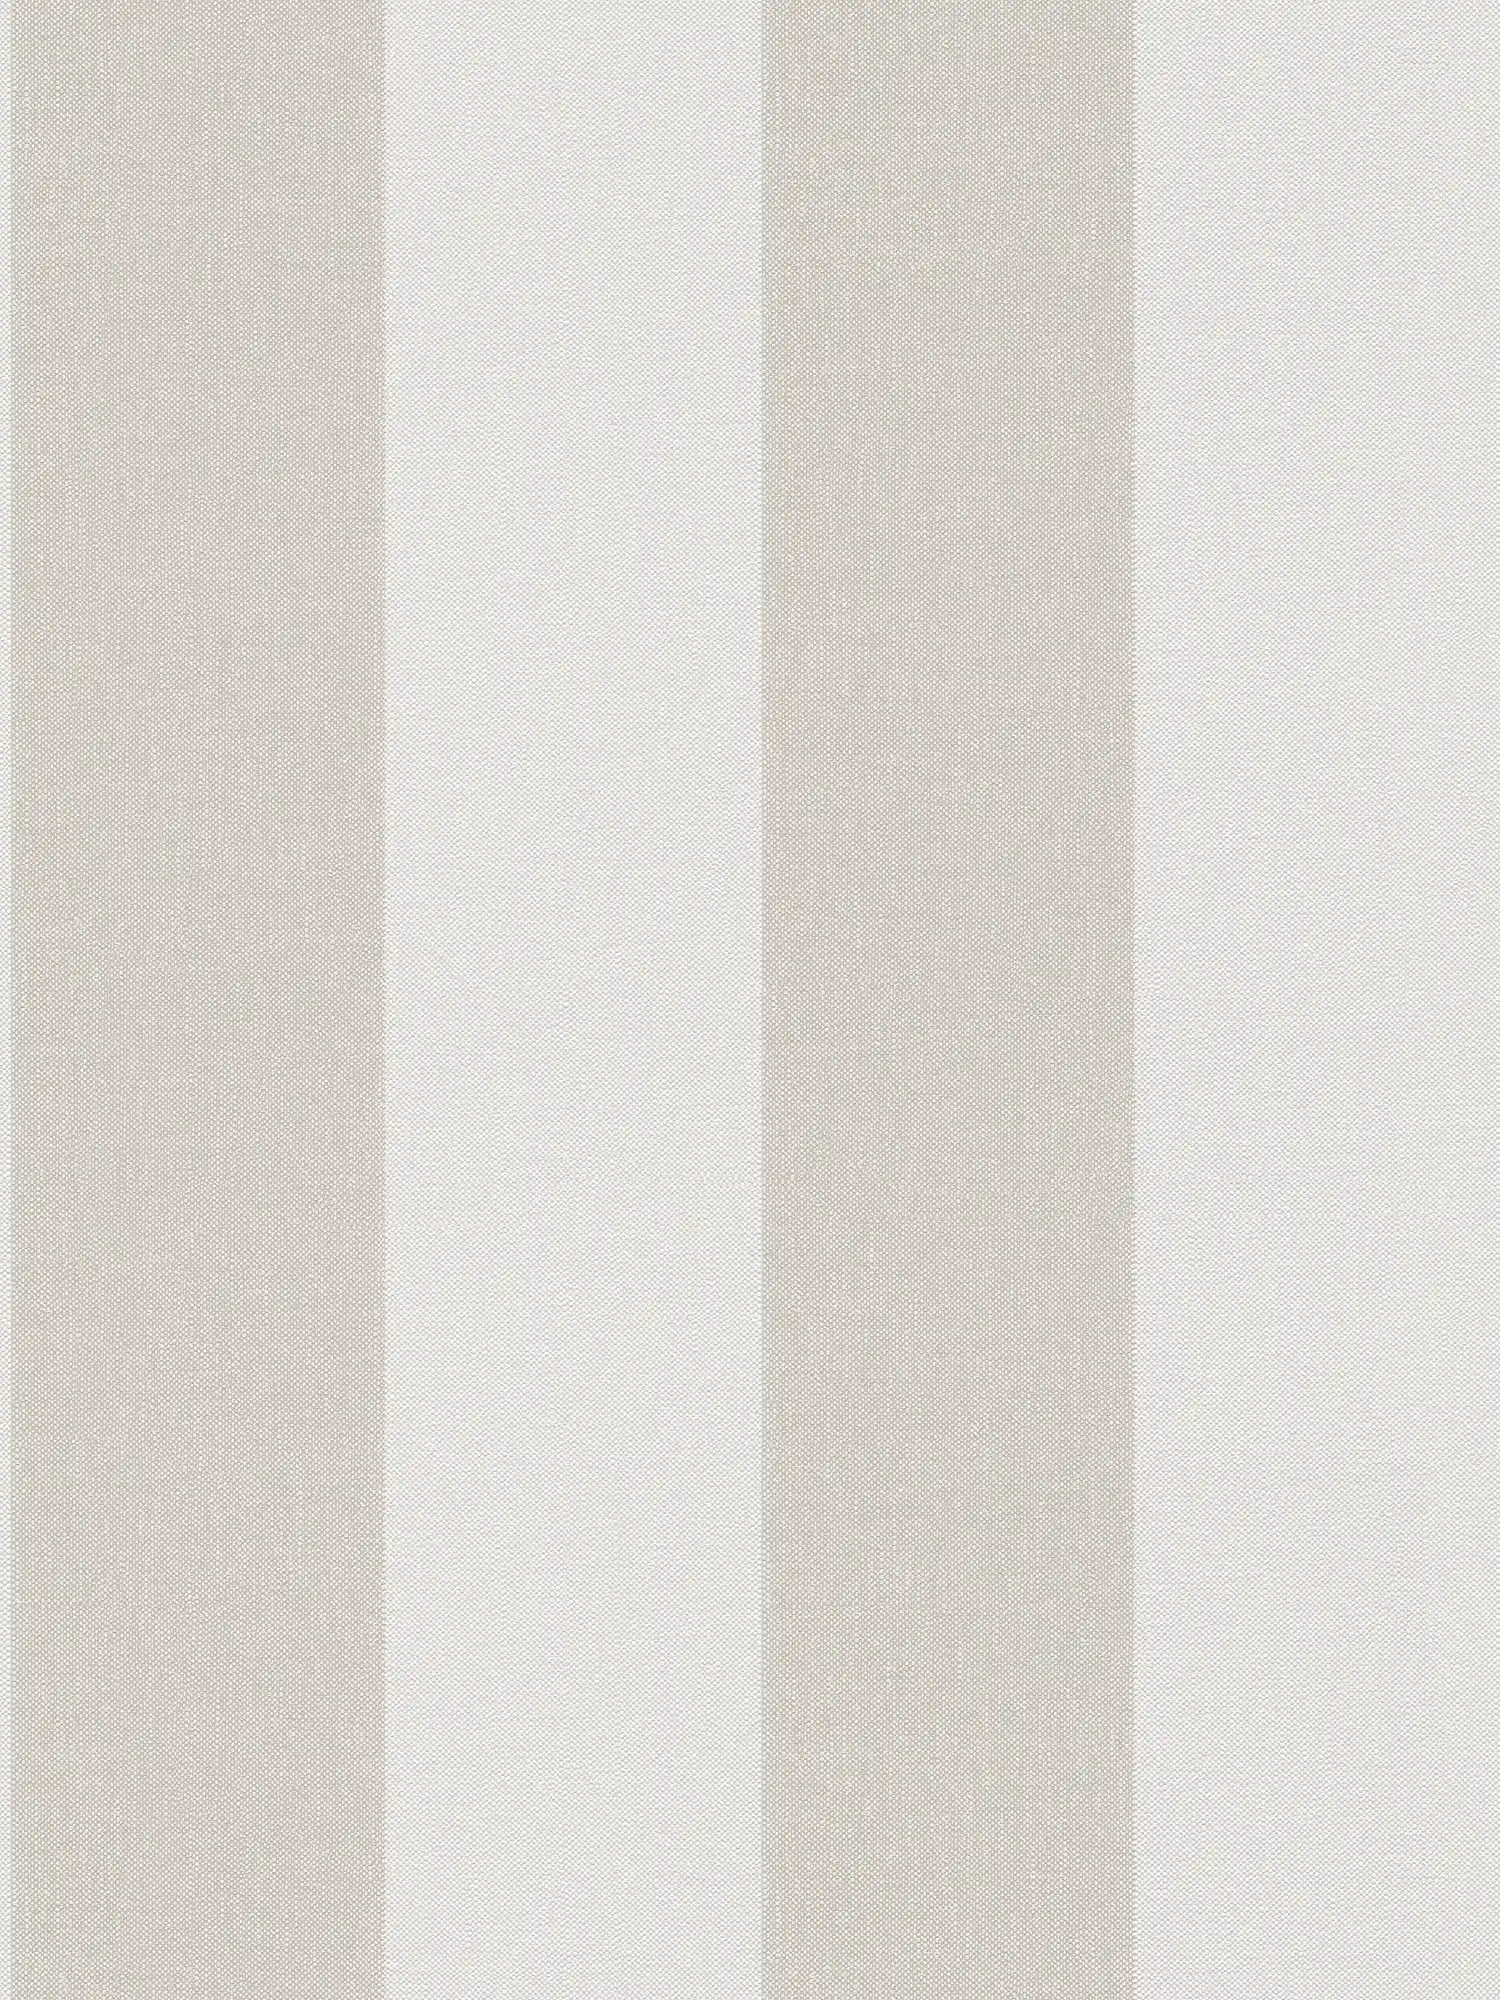         Block stripes wallpaper with textile structure - beige, brown
    